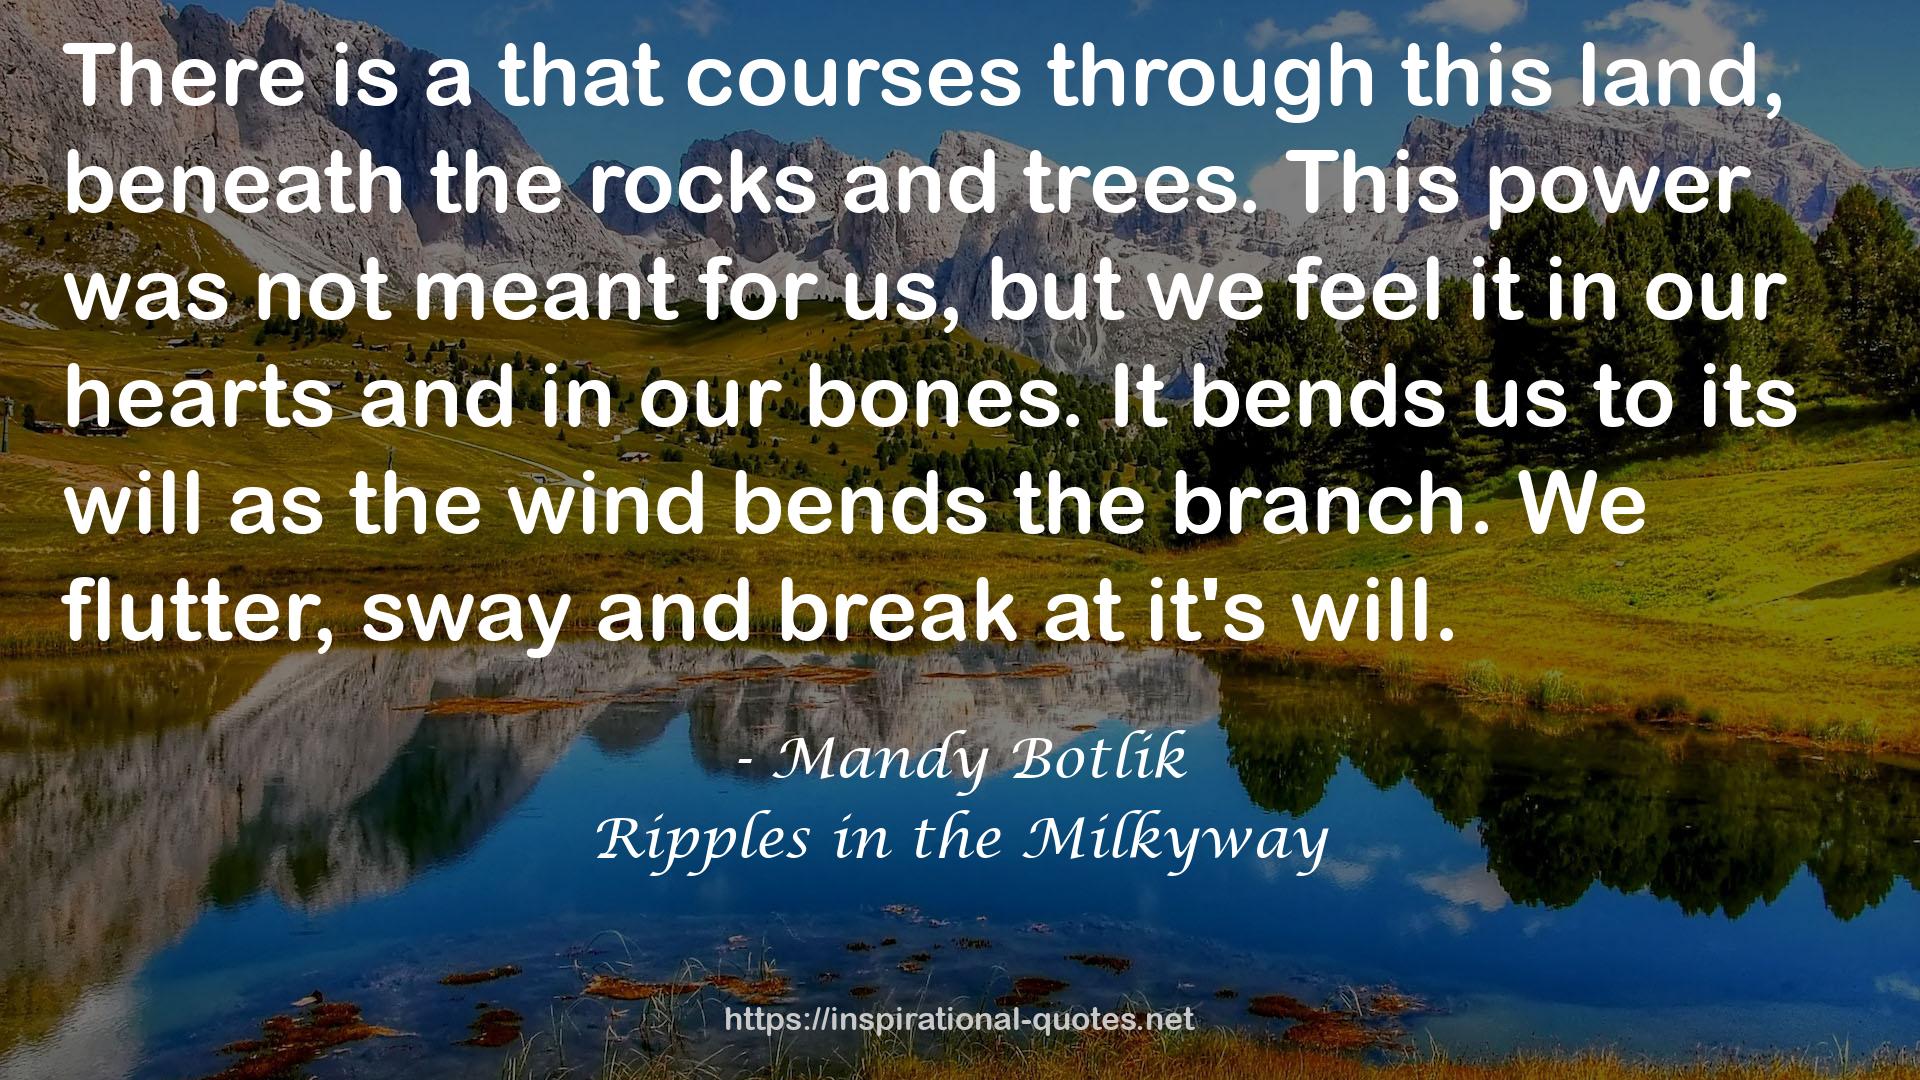 Ripples in the Milkyway QUOTES